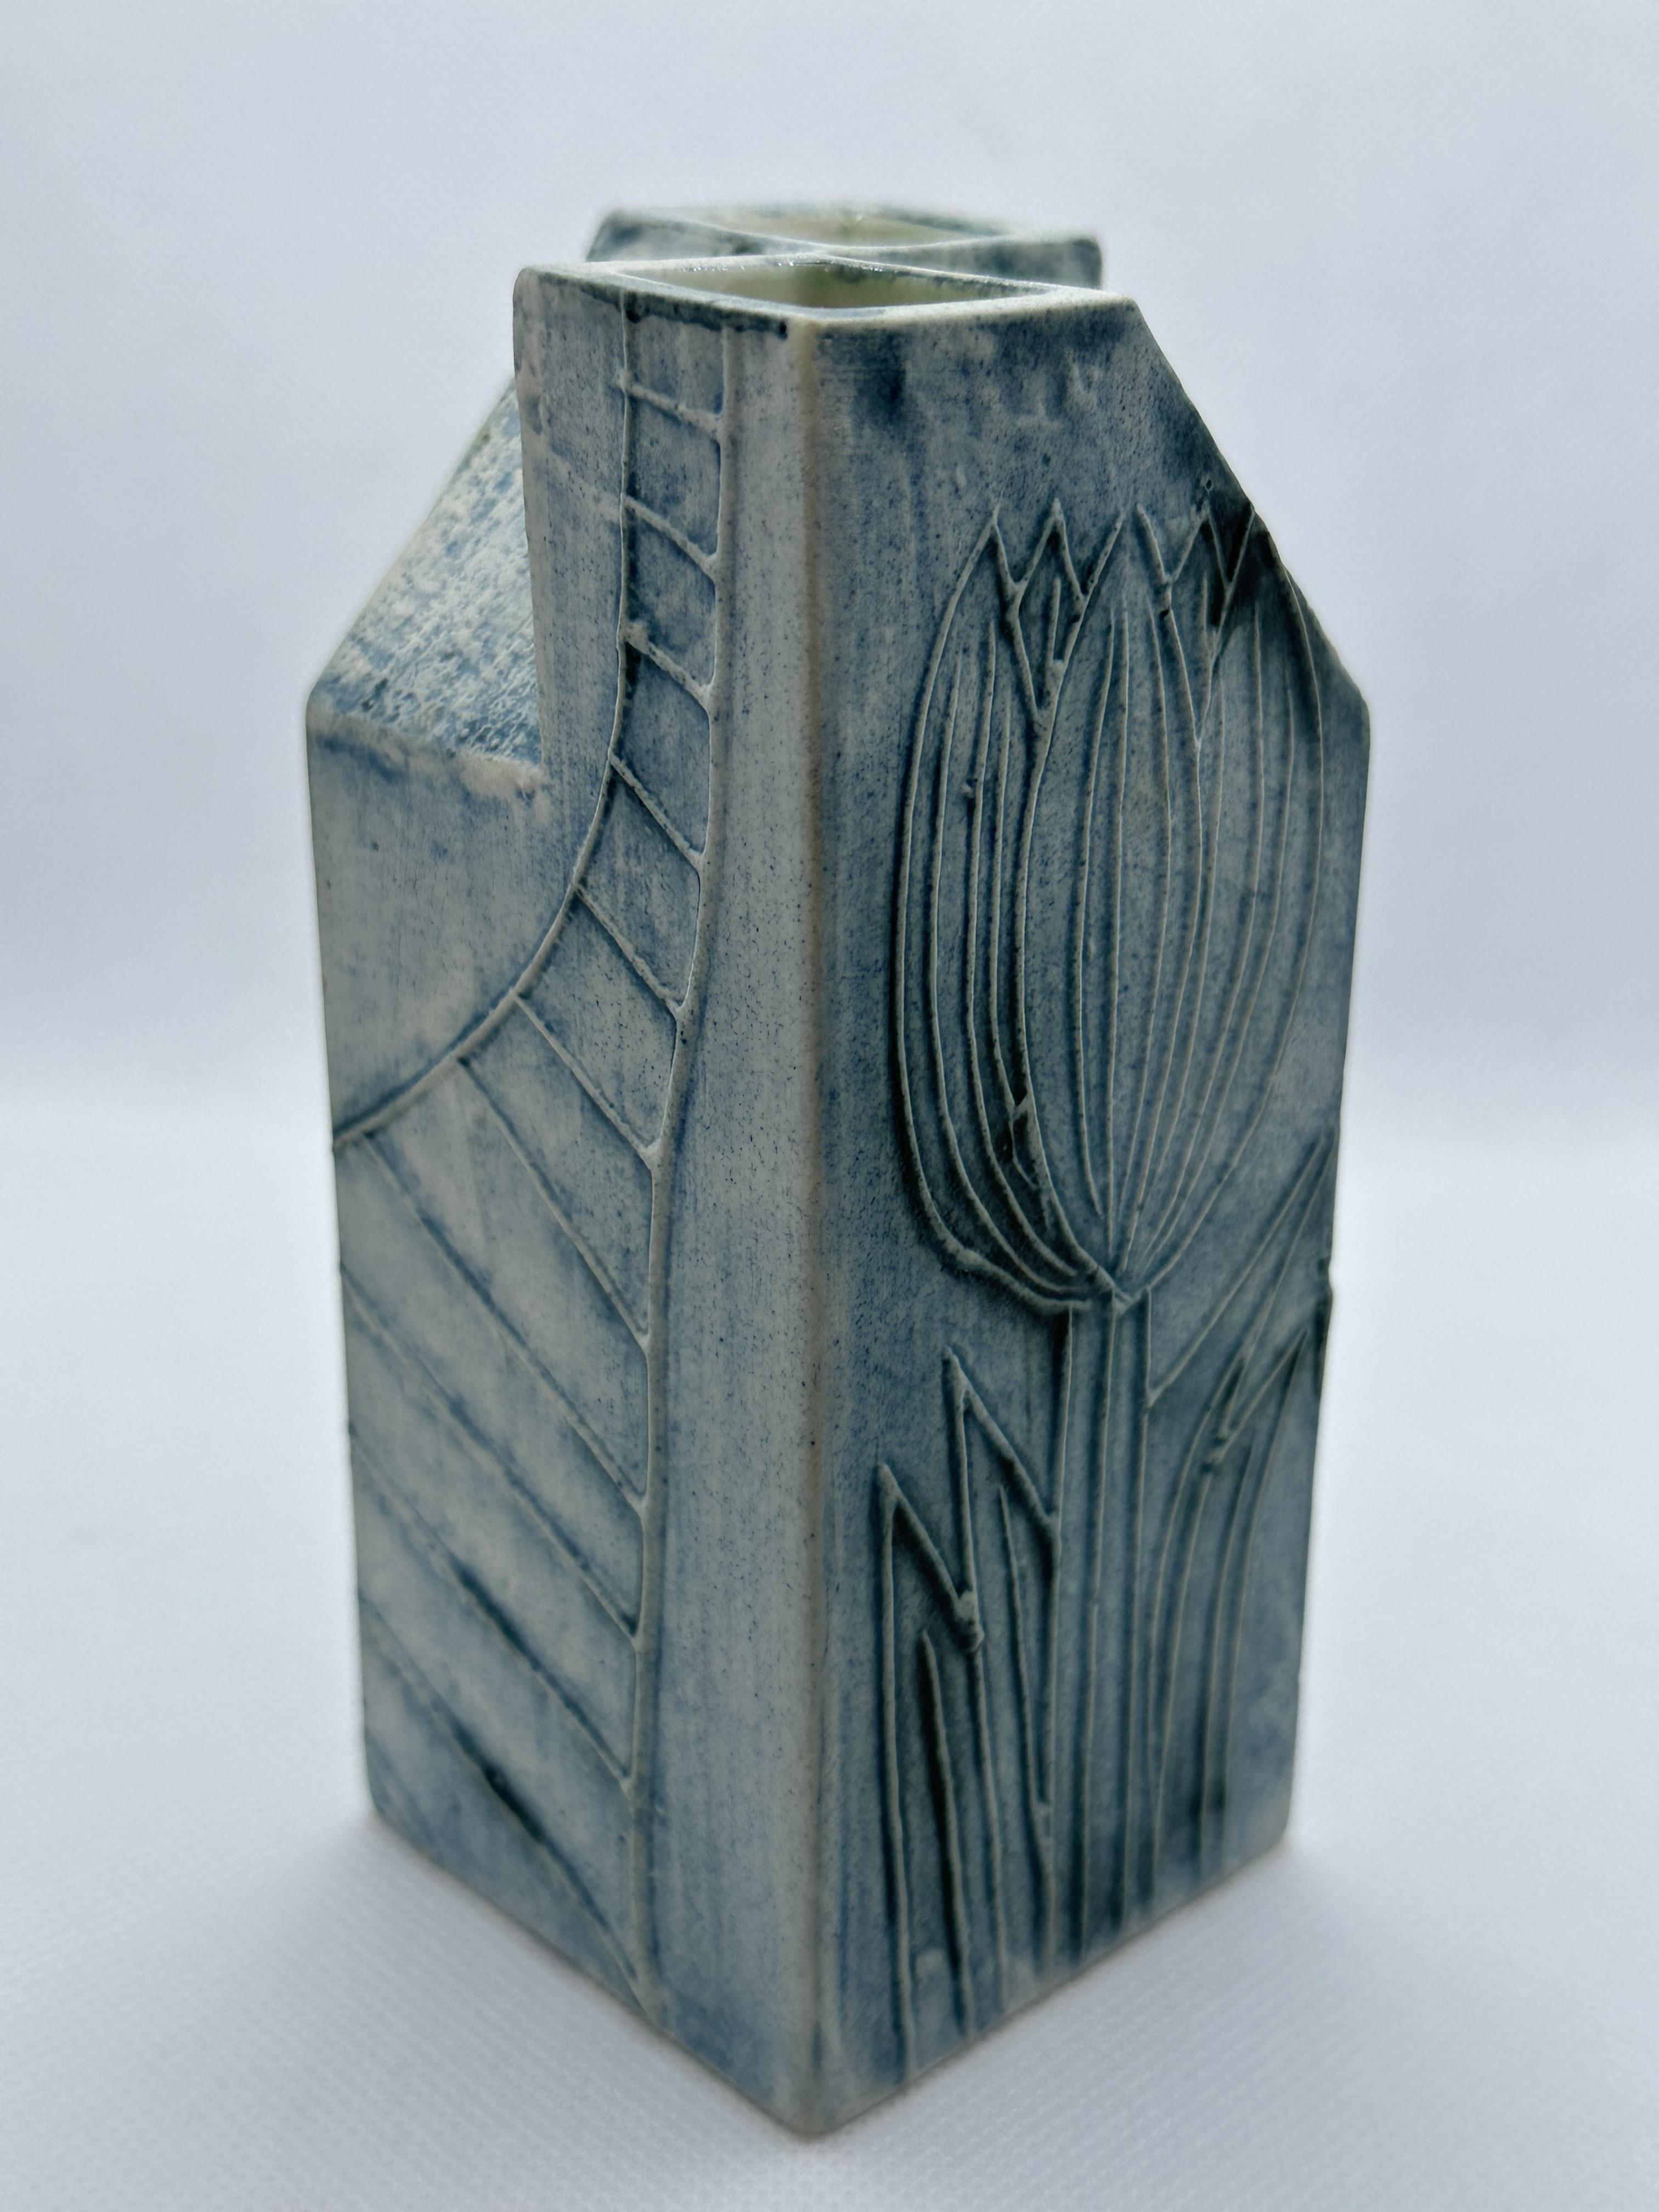 Wood Fired Ceramic Vase (H14cm) along with Carn Pottery Pe - Image 18 of 22